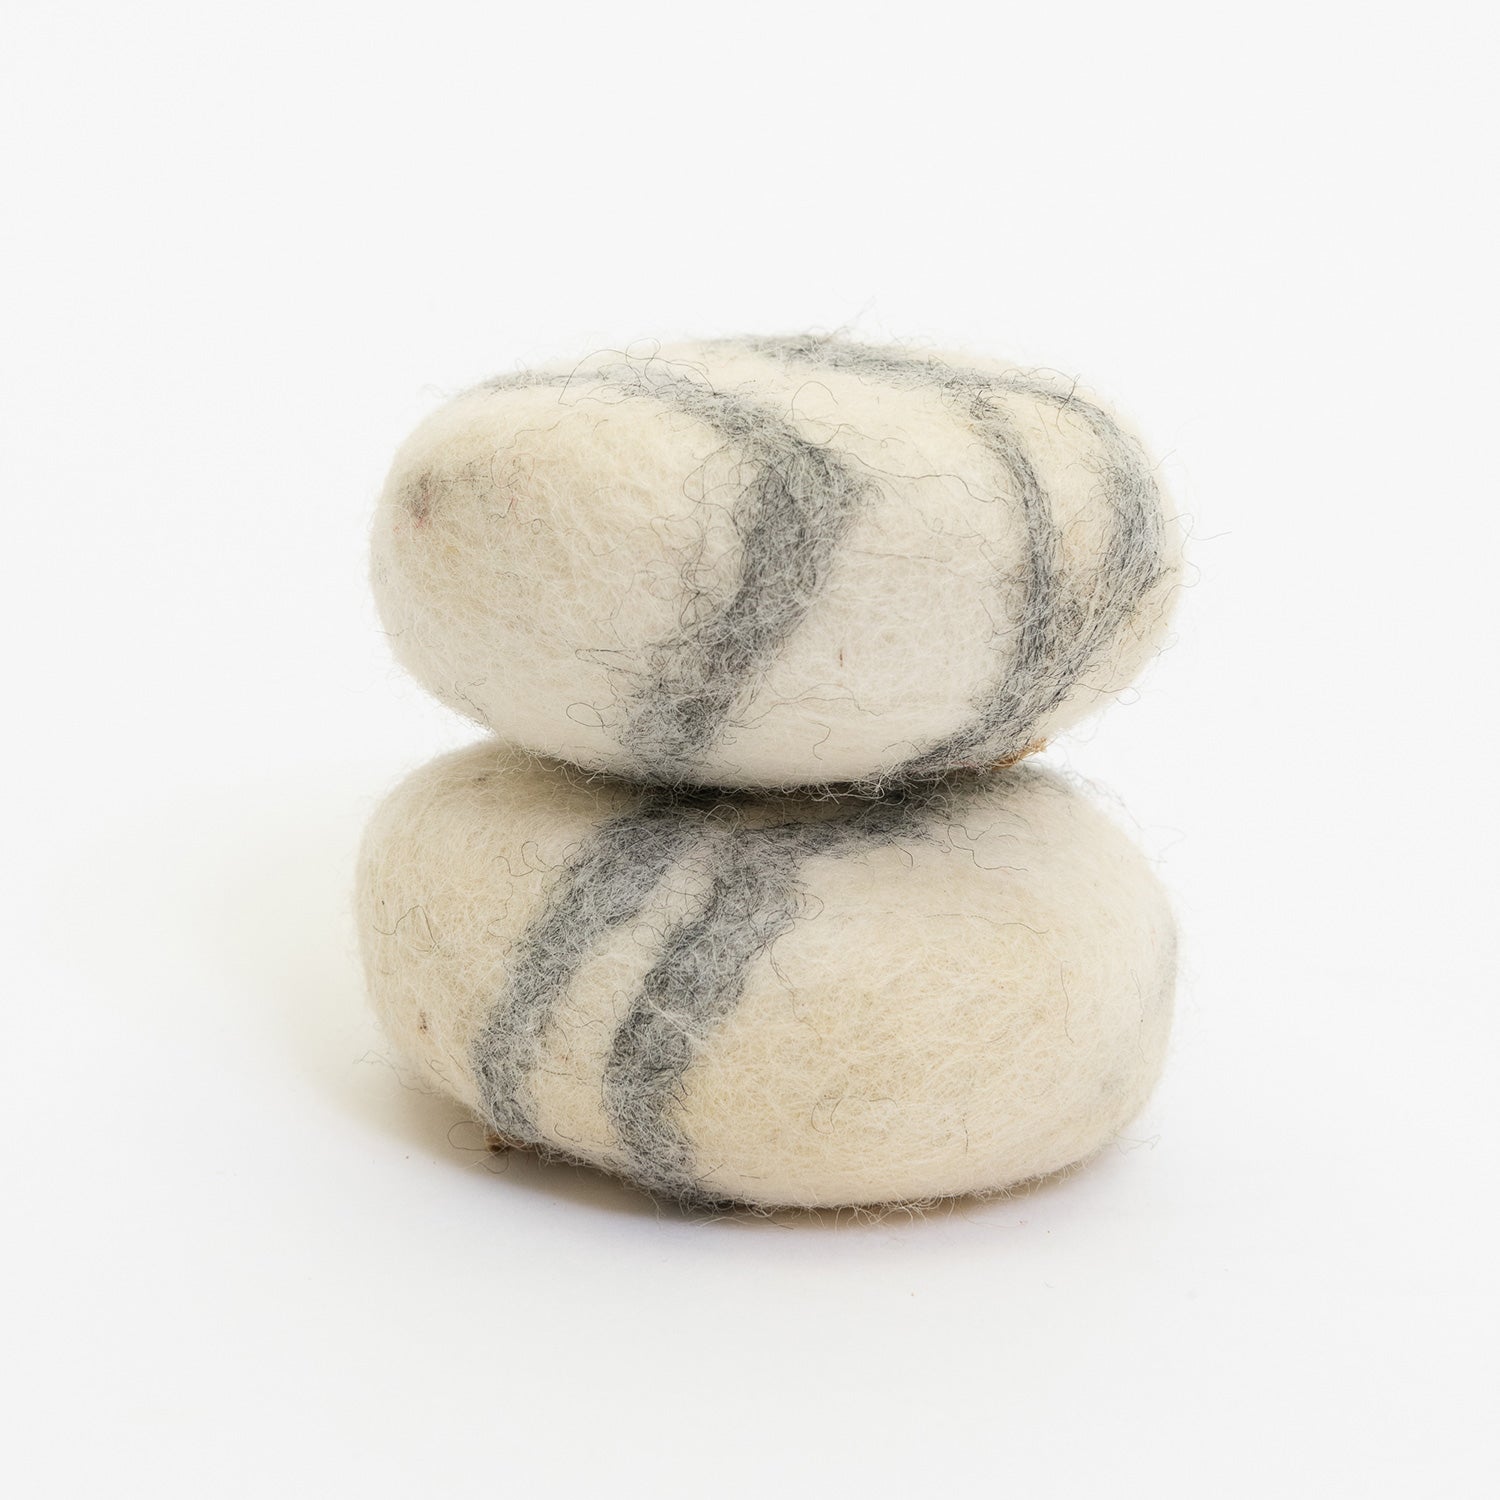 Two felt soap bars pictured on a white background. They are round and have a grey stripe marble style.